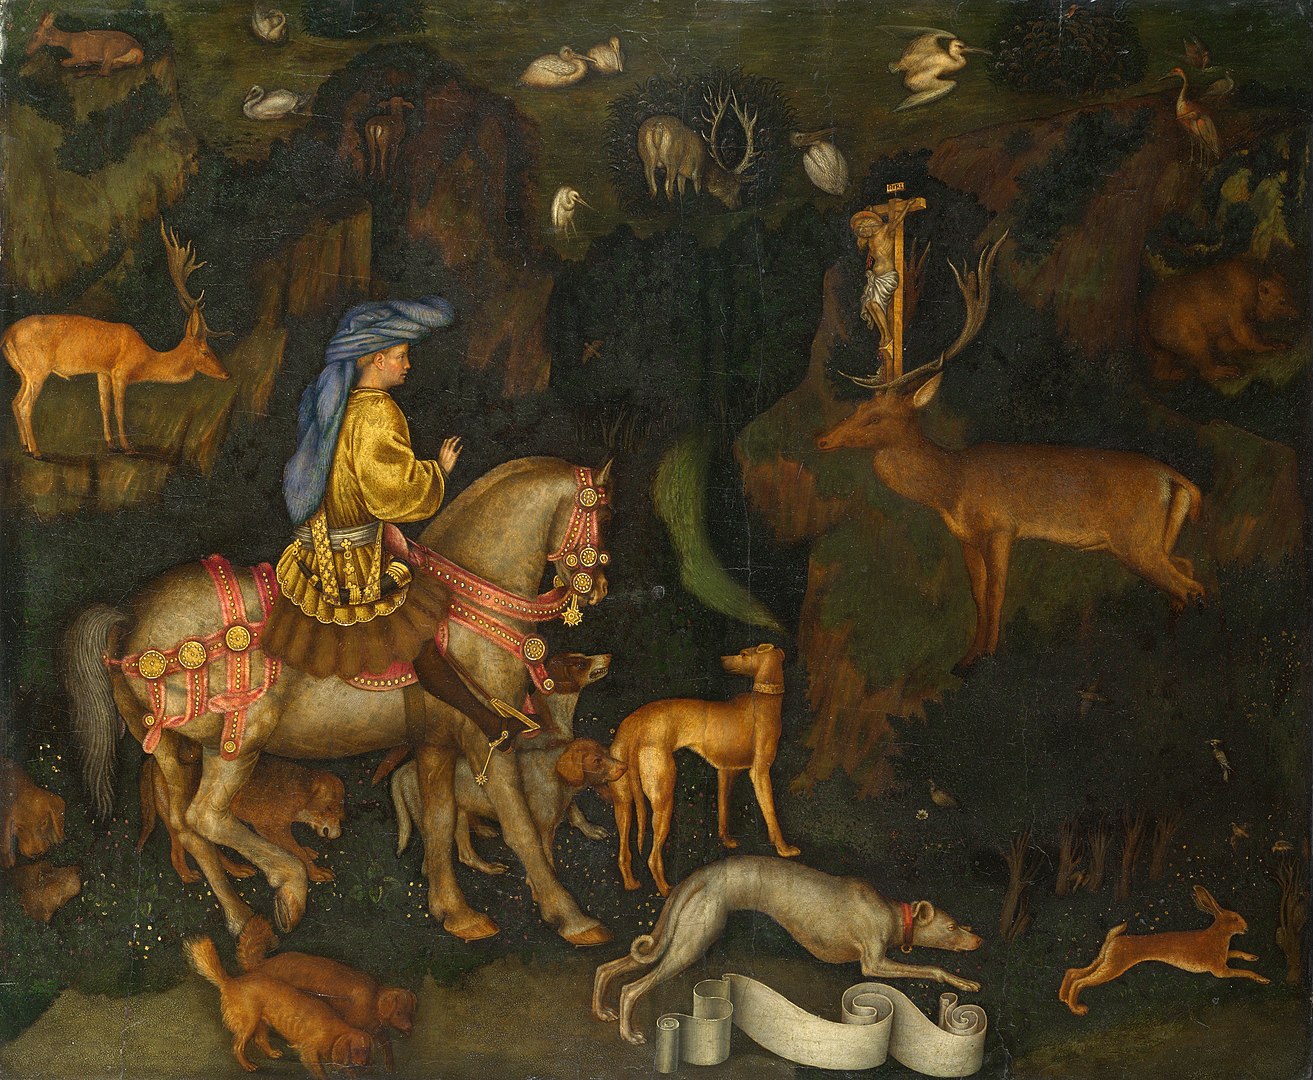 A man riding a horse rides through a forest surrounded by a variety of other four legged creatures.